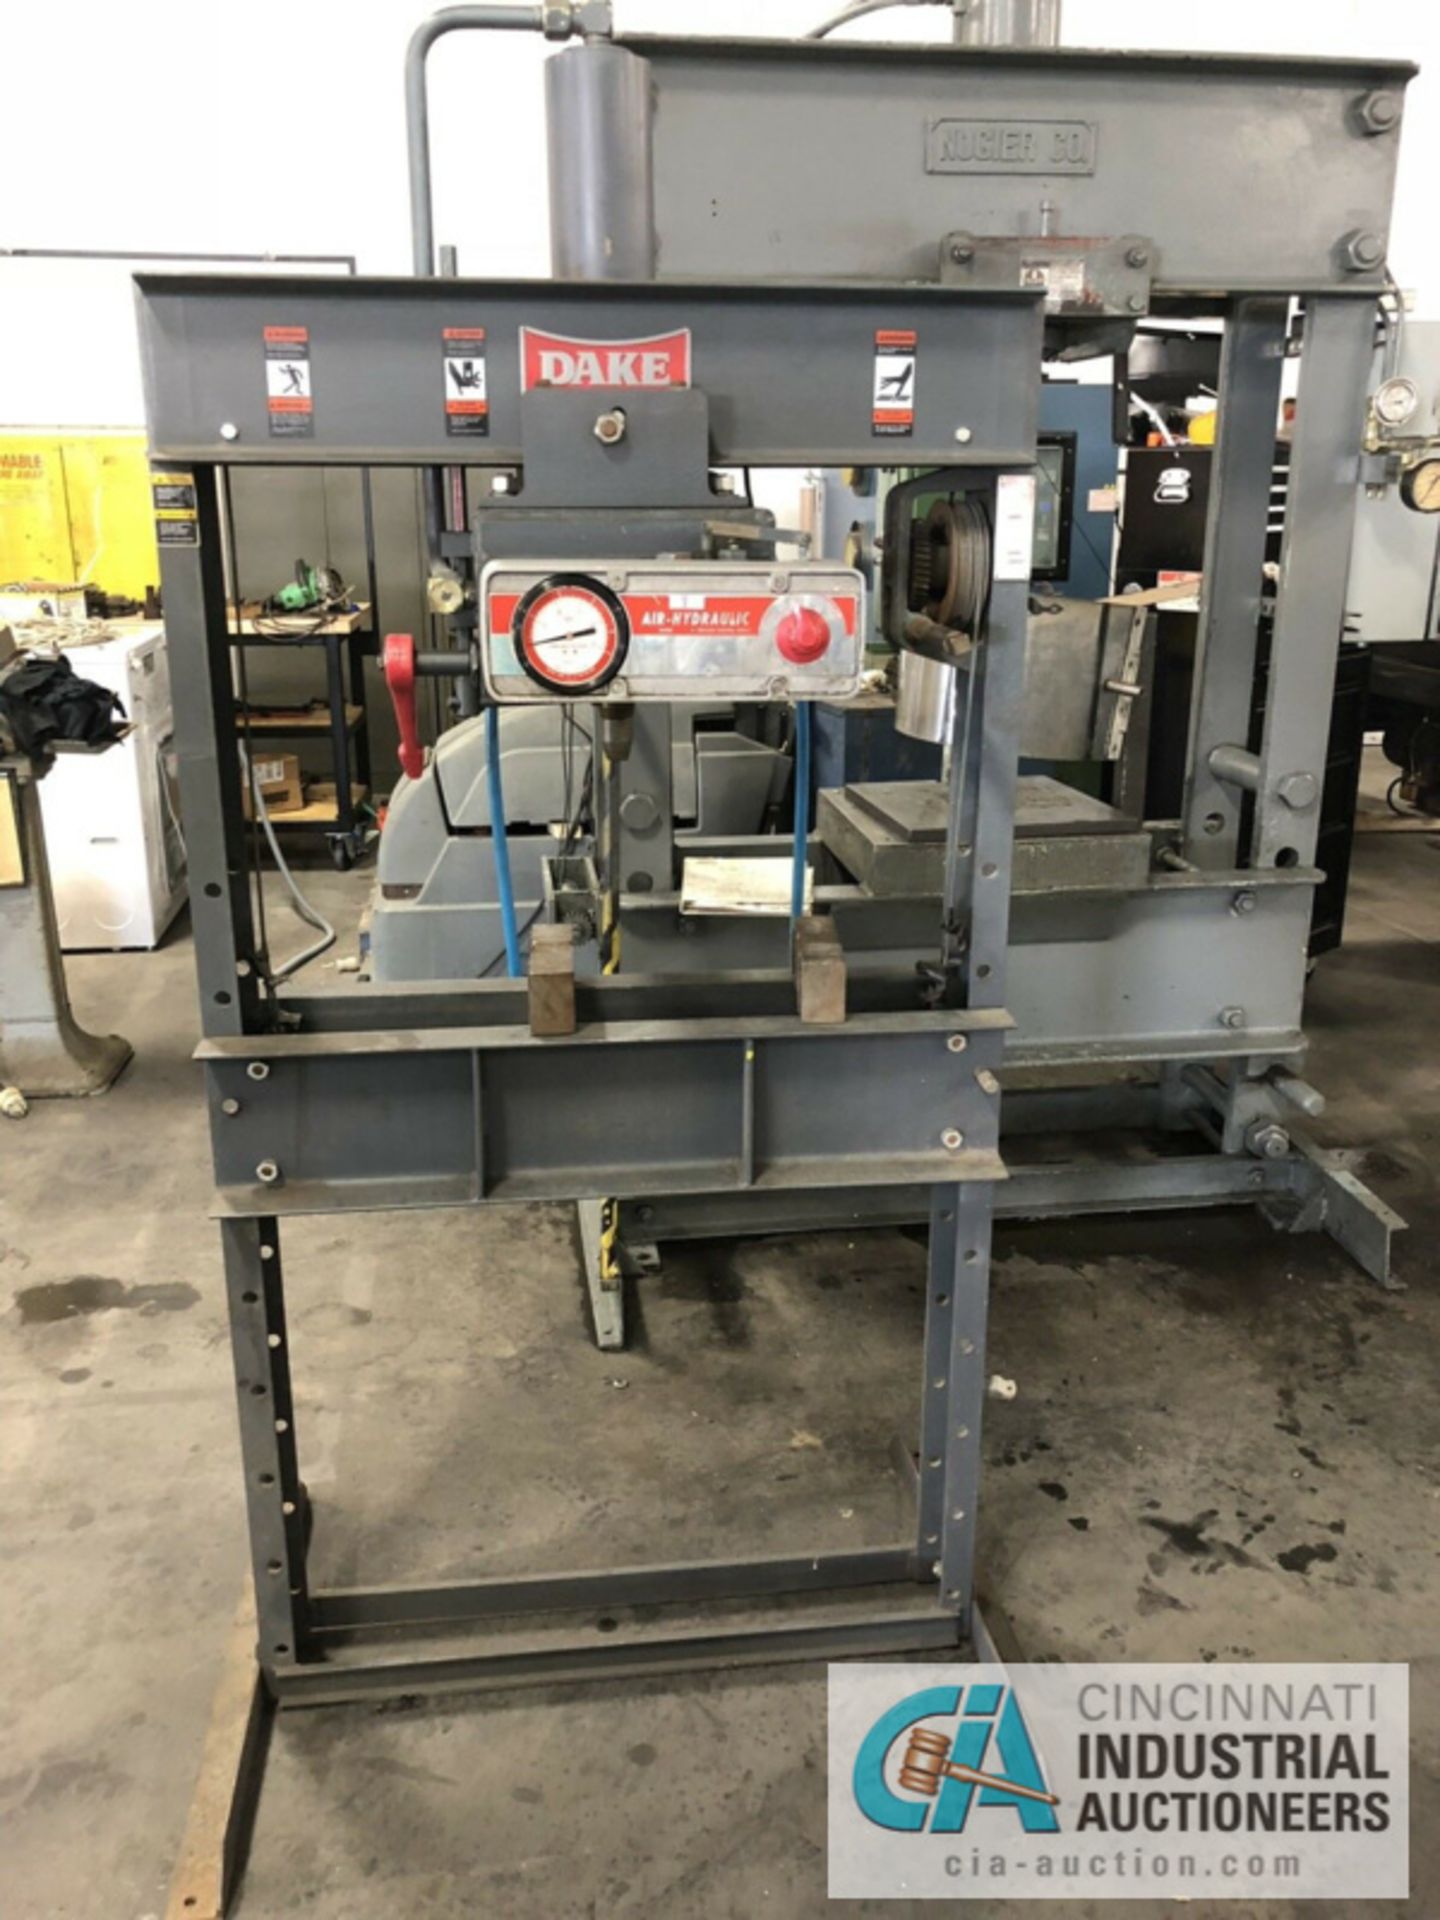 **25-TON DAKE 6-425 AIR/HYDRAULIC H-FRAME PRESS **LOCATED OFFSITE AT 4850 CRITTENDEN, LOUISVILLE, KY